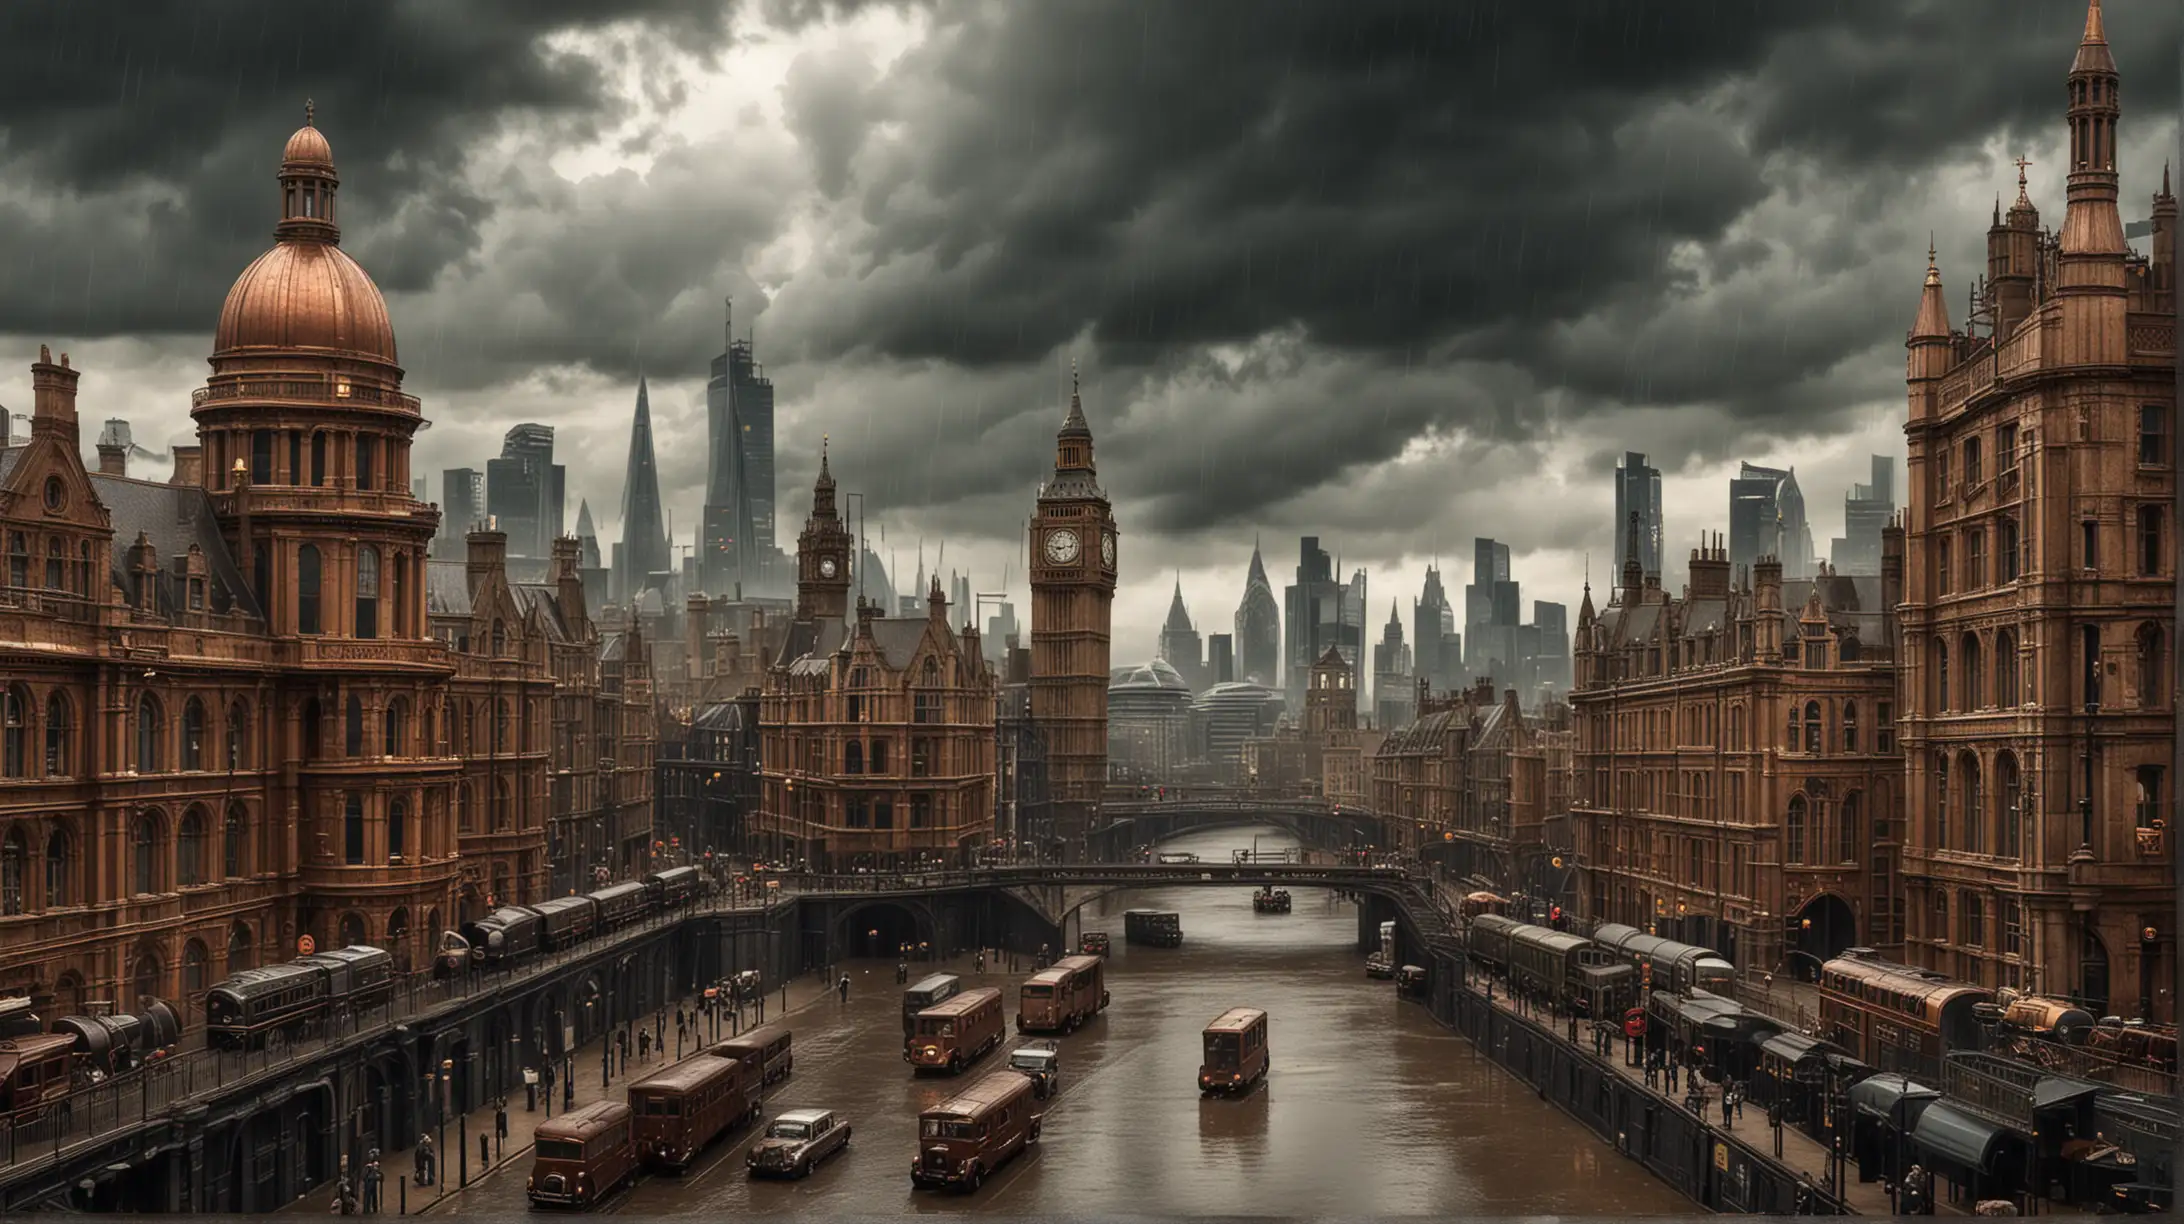 the steampunk version of London, copper, brass, steel, rainy and cloudy